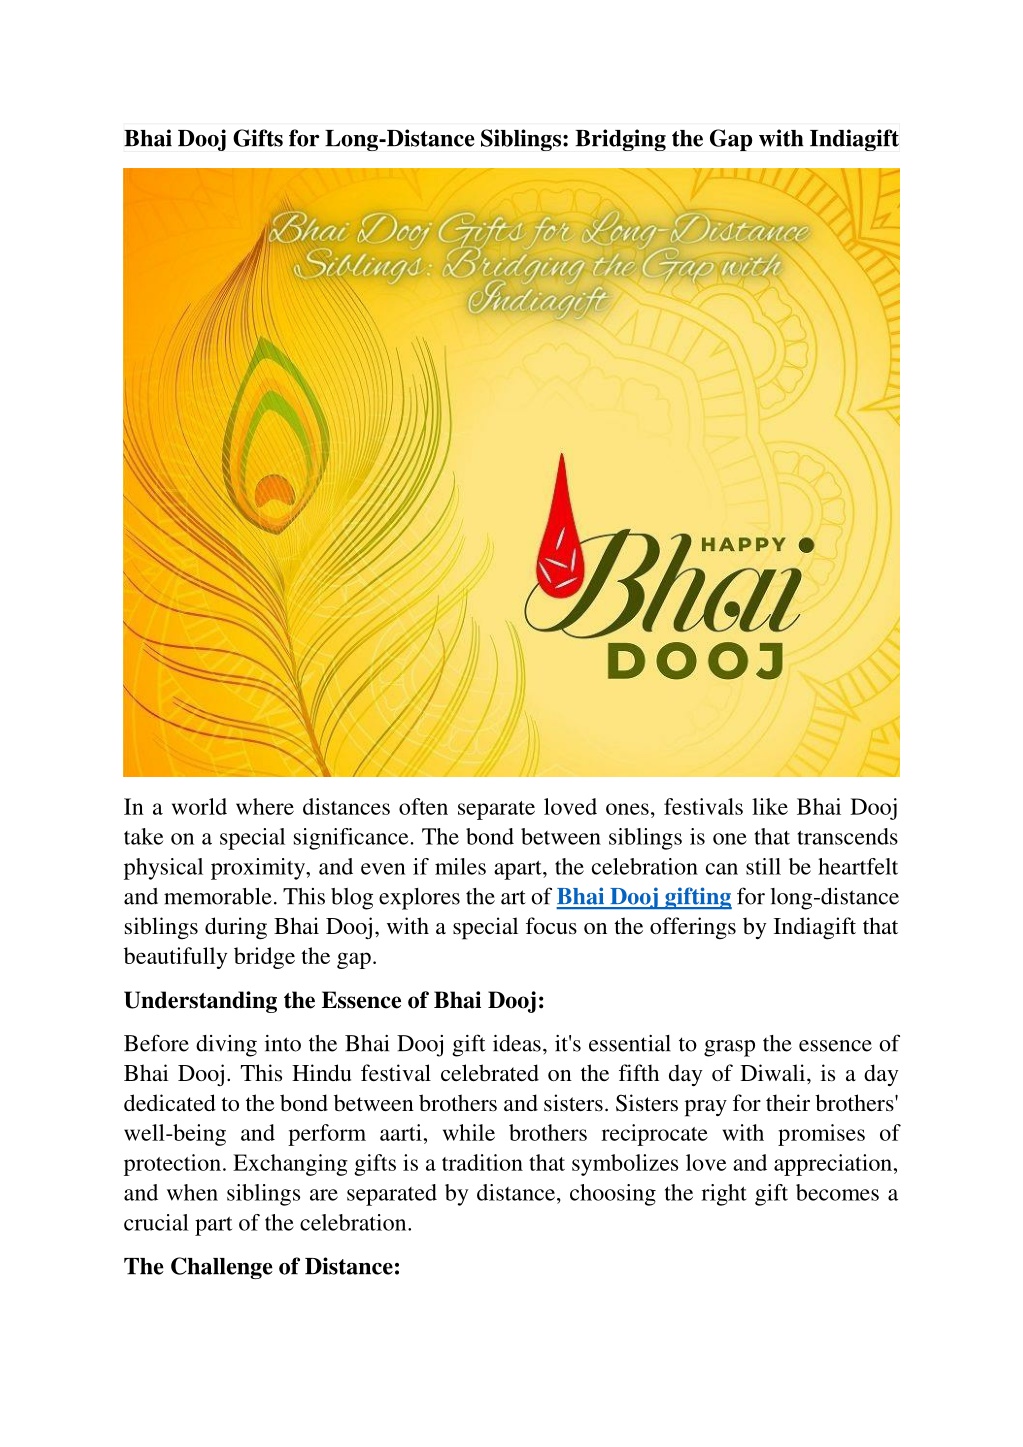 PPT - Bhai Dooj Gifts for Long-Distance Siblings- Bridging the Gap with  Indiagift PowerPoint Presentation - ID:12640624